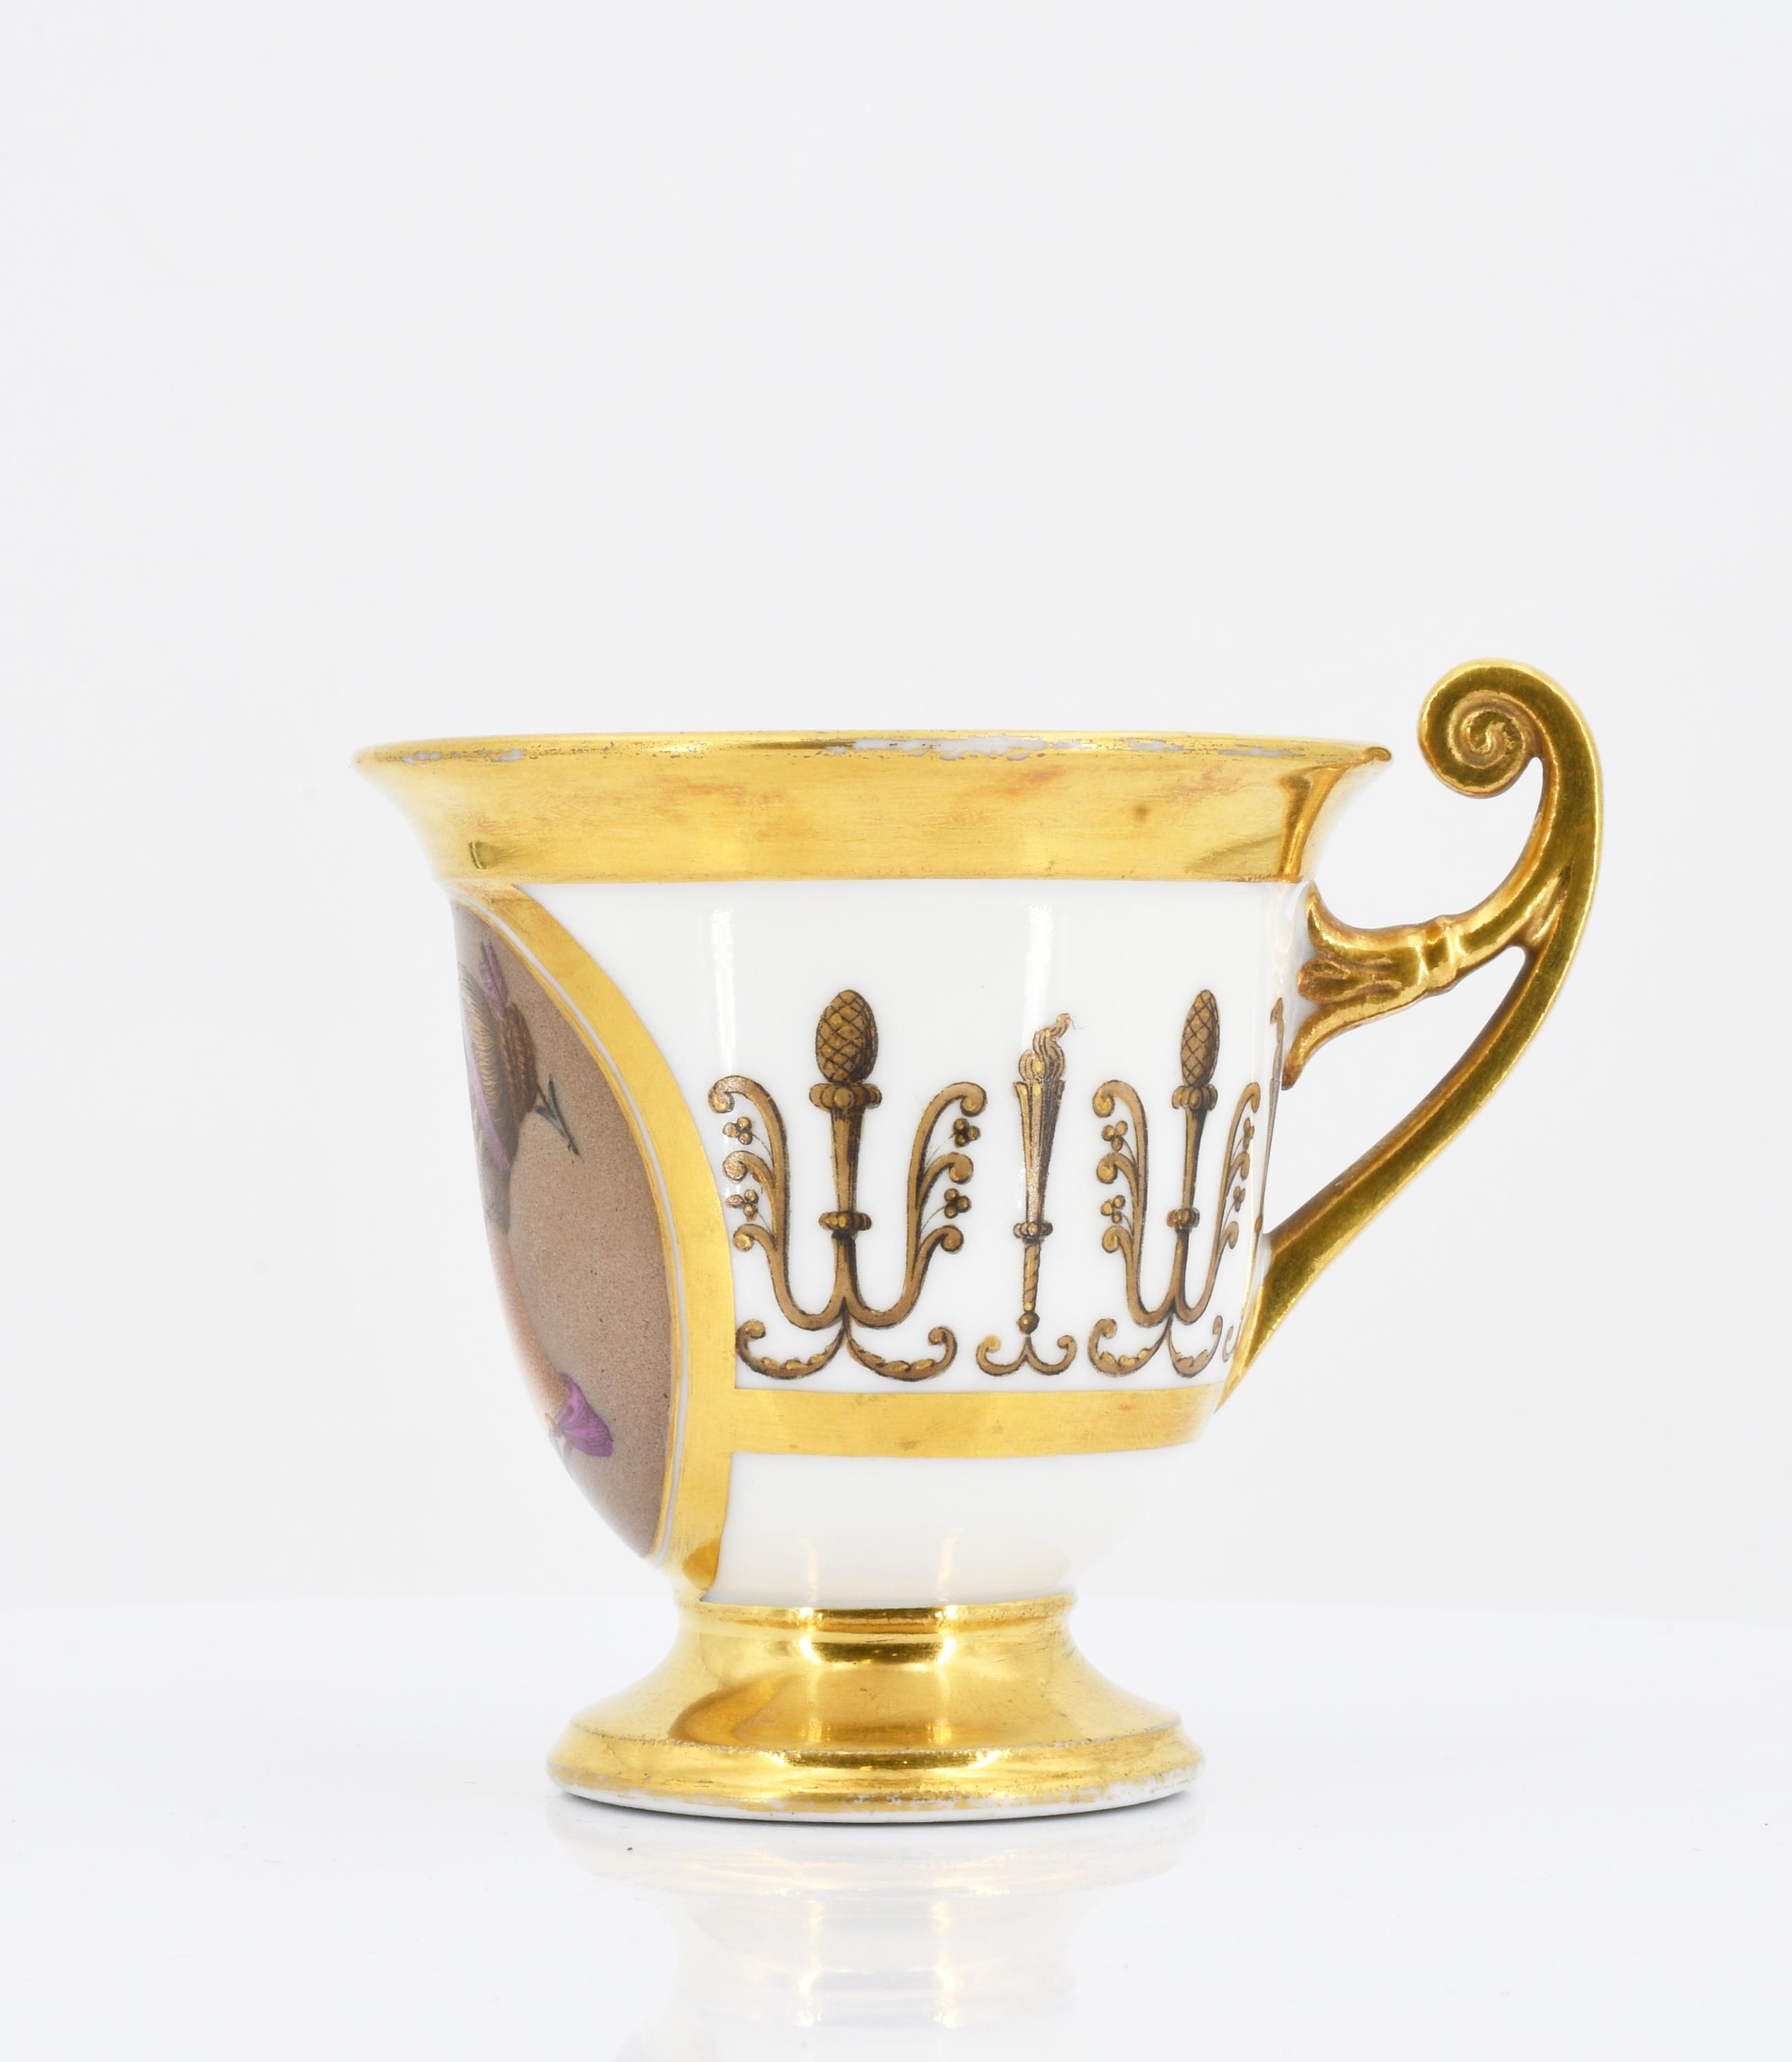 Empire Cup and Saucer with Portraits of Women - Image 5 of 9